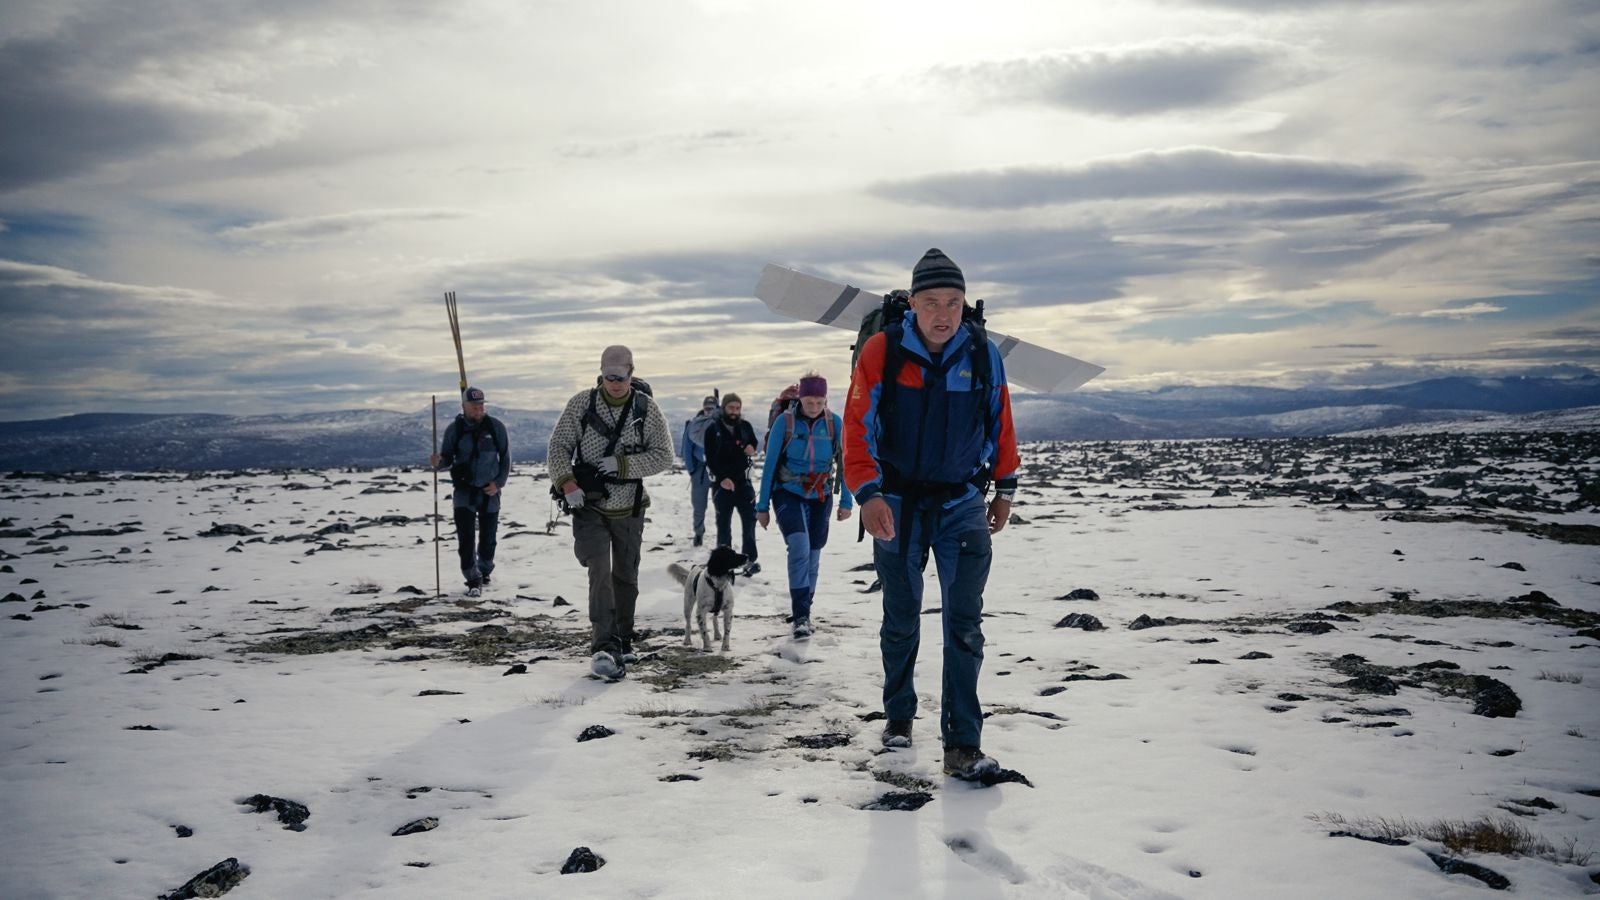 The team on their way to the Digervarden ice patch. (Image: Andreas Christoffer Nilsson, secretsoftheice.com.)